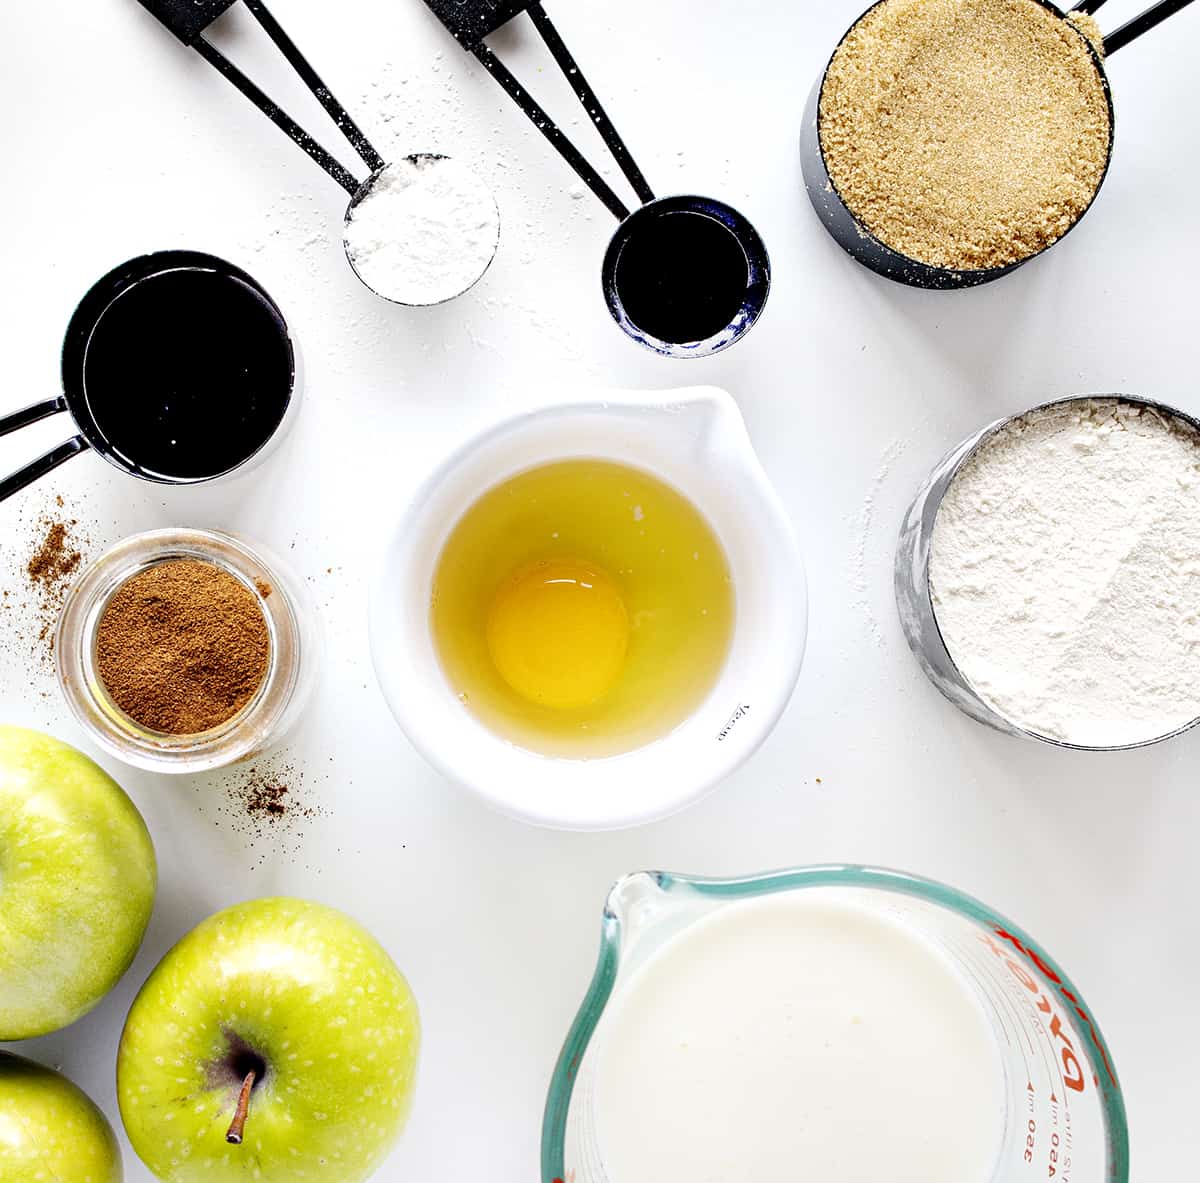 Ingredients for Spiced Apple Pancakes